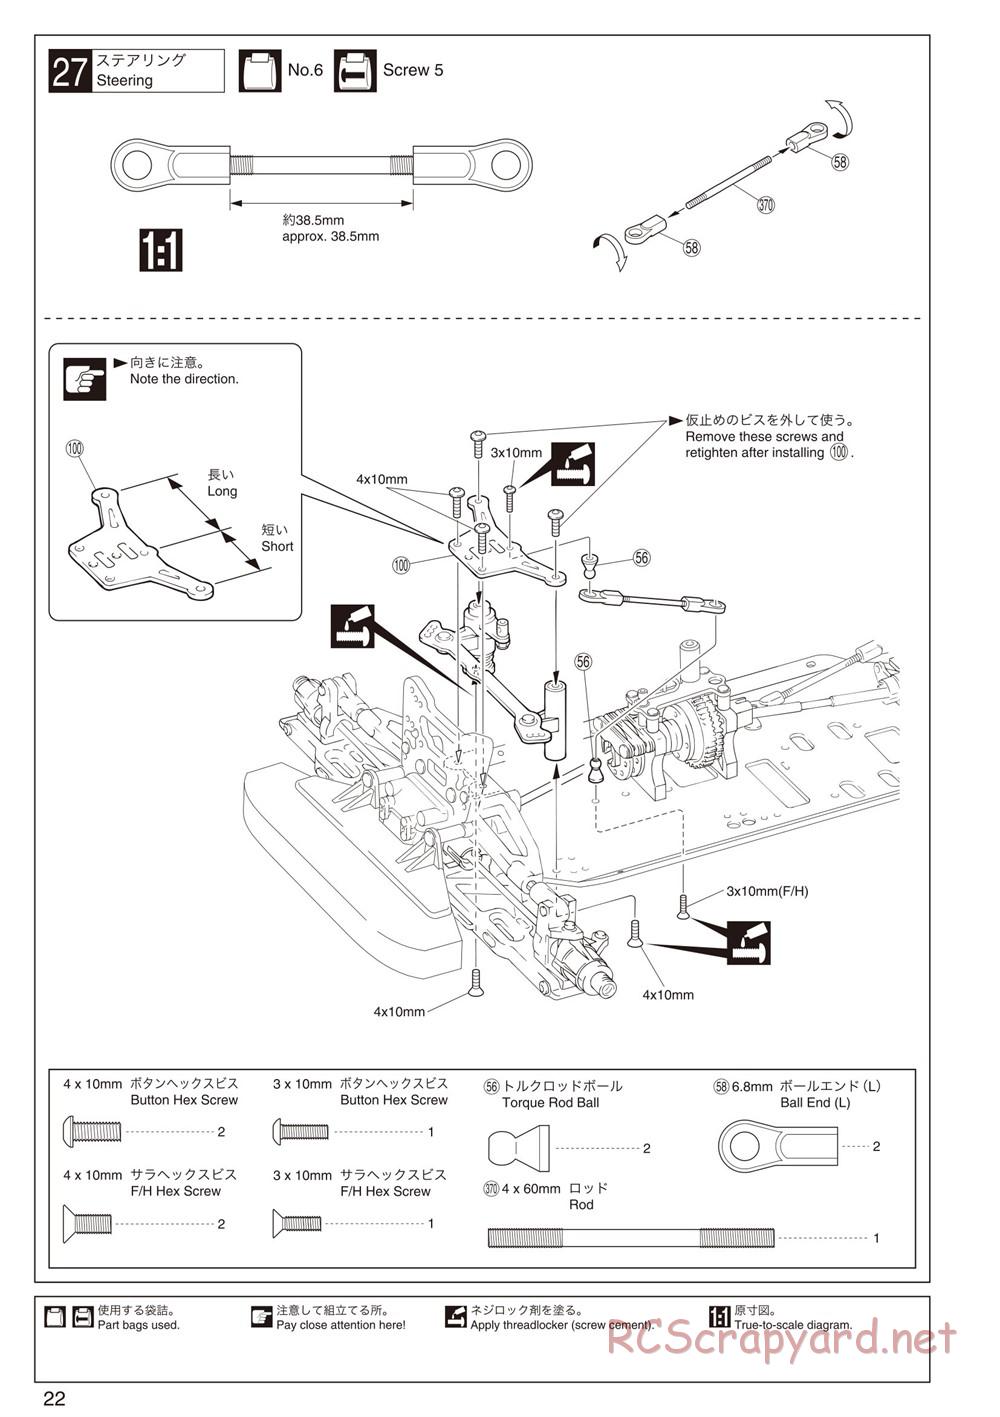 Kyosho - Inferno GT2 - Manual - Page 22